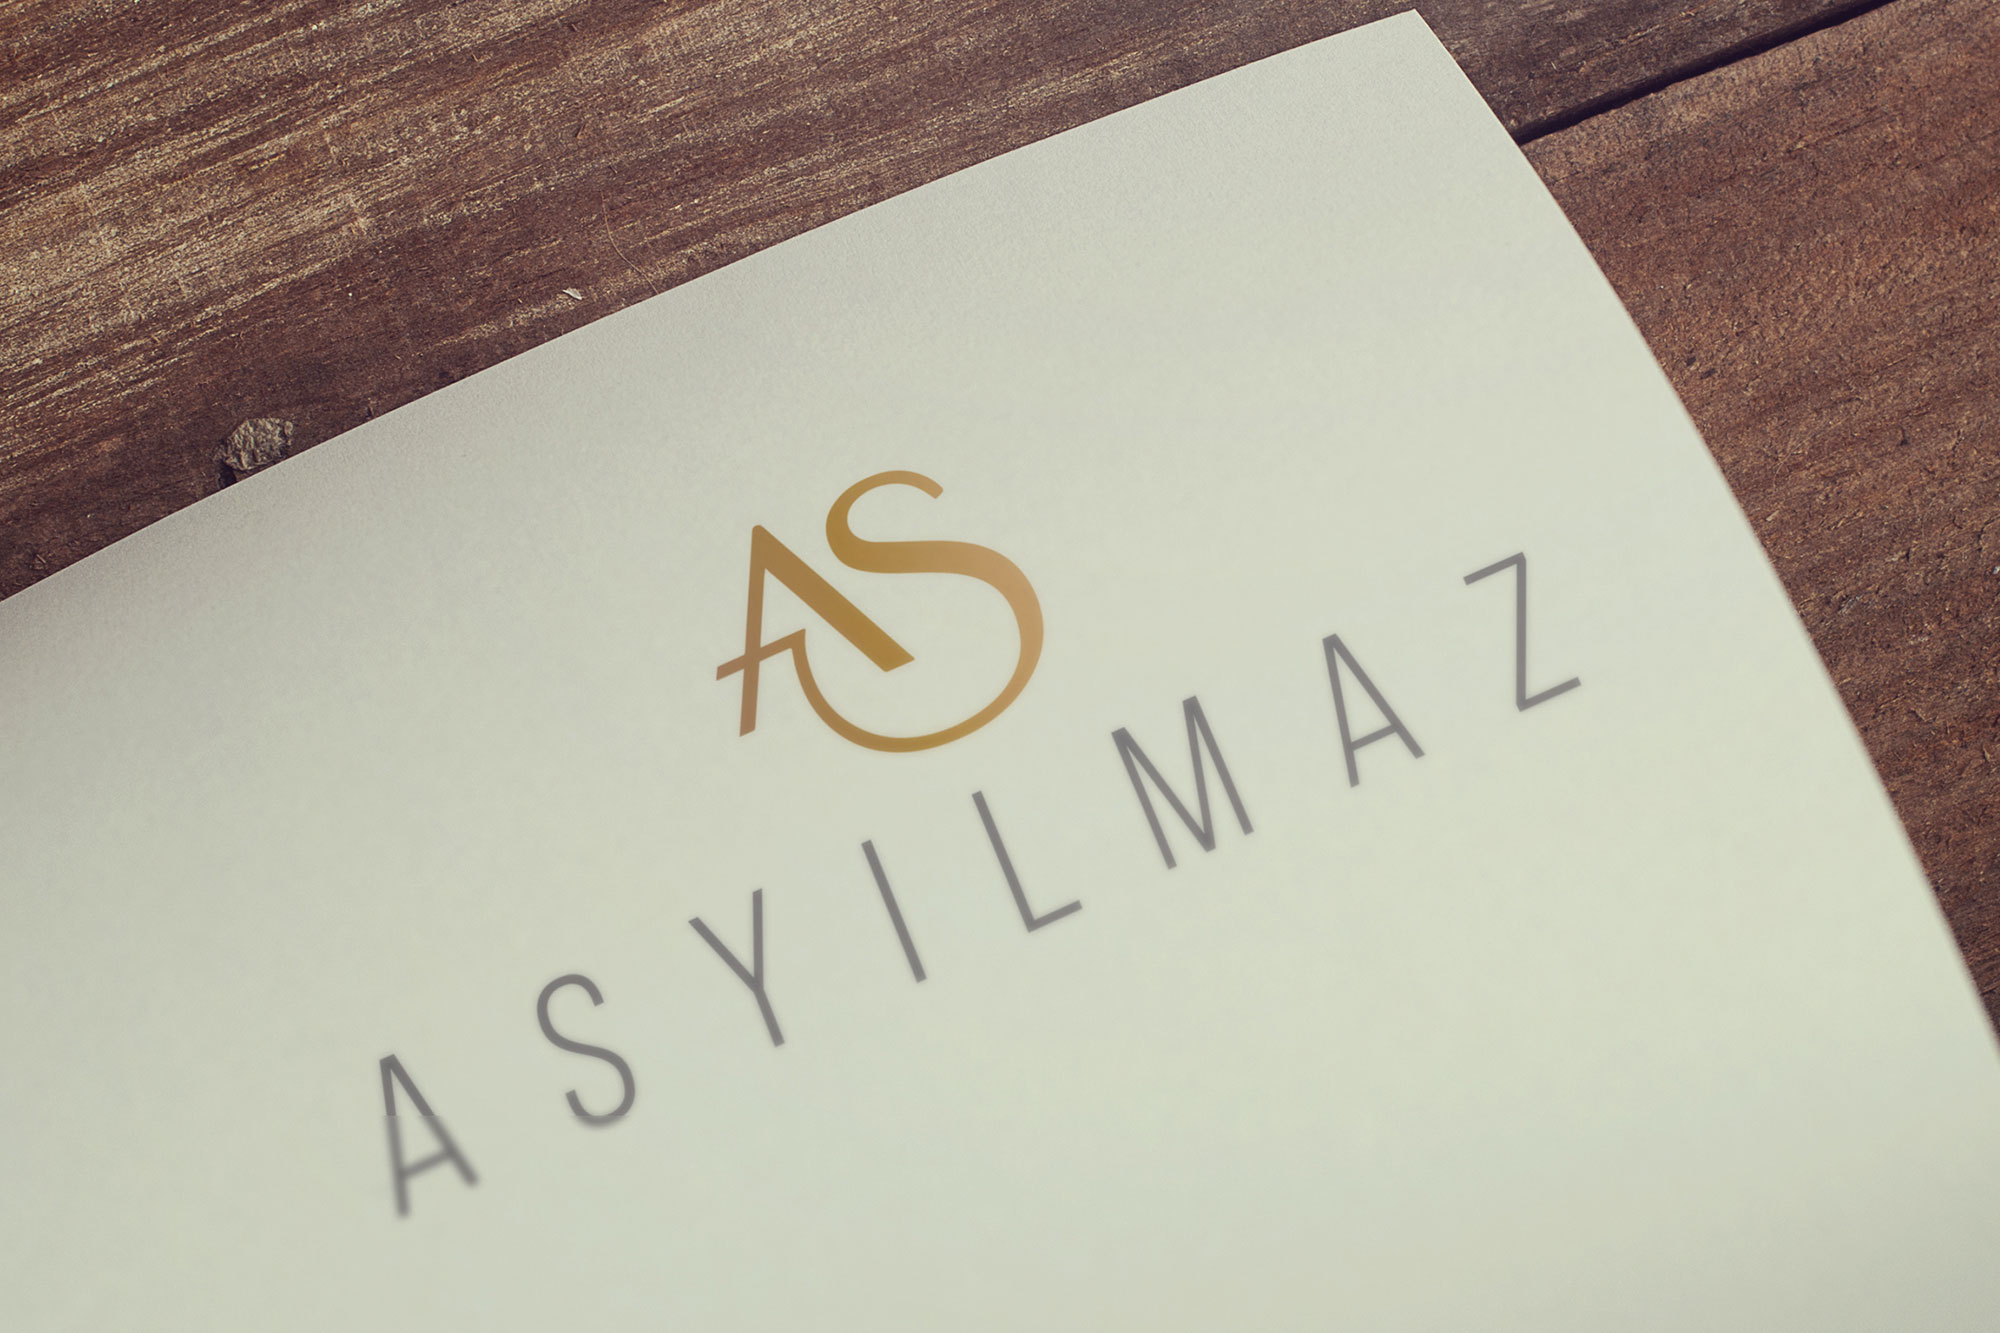 Asyılmaz Group Logo, Corporate ID and Promotion